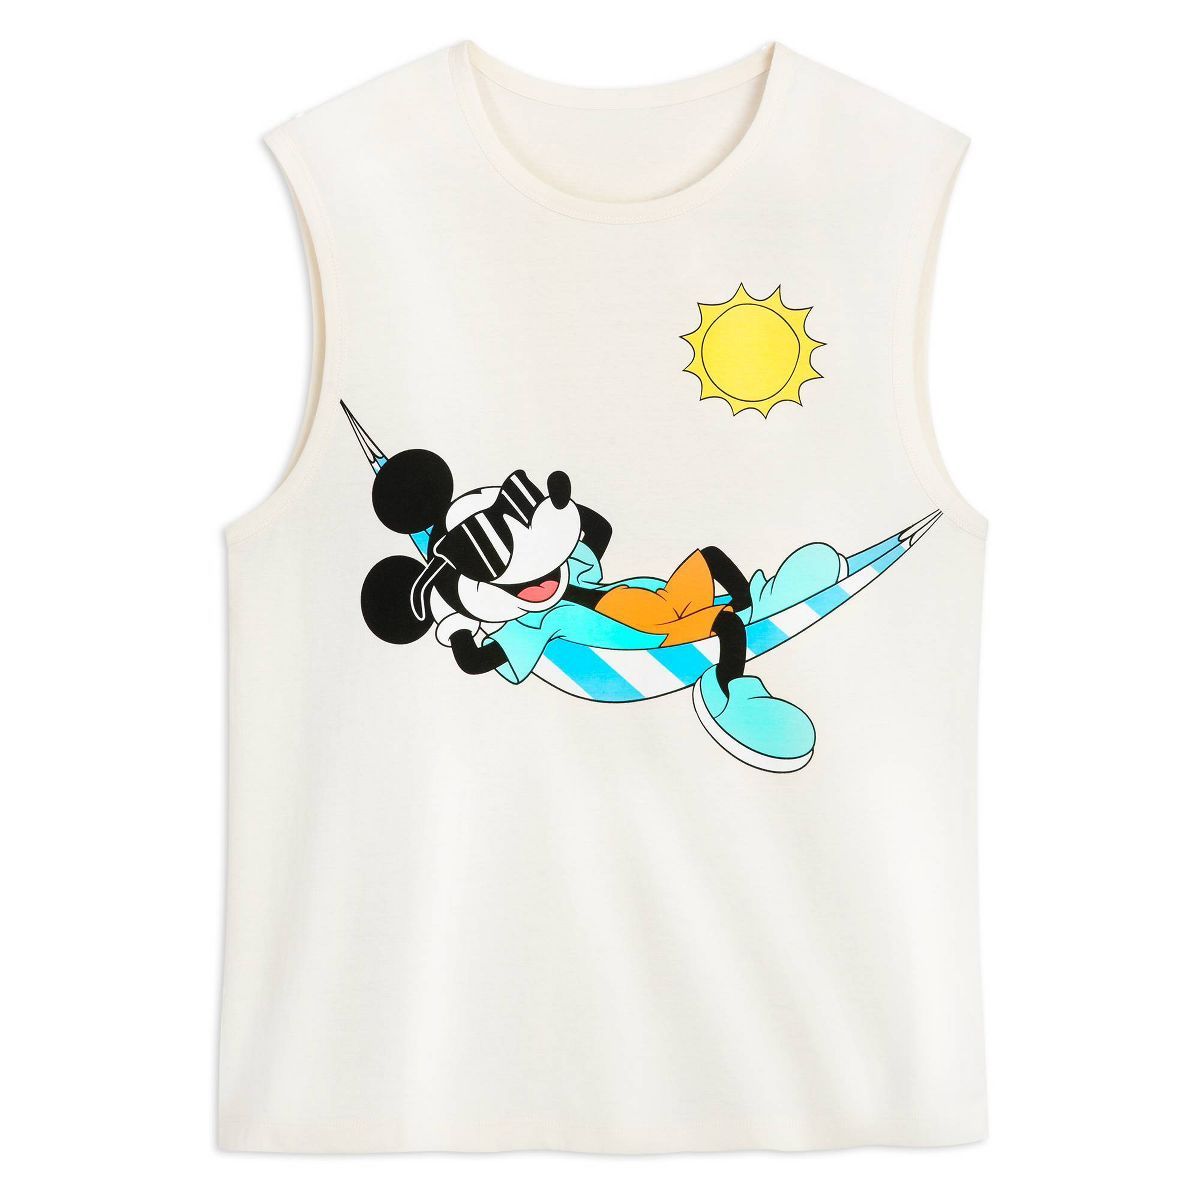 Men's Mickey Mouse Graphic Tank Top - White - Disney Store | Target